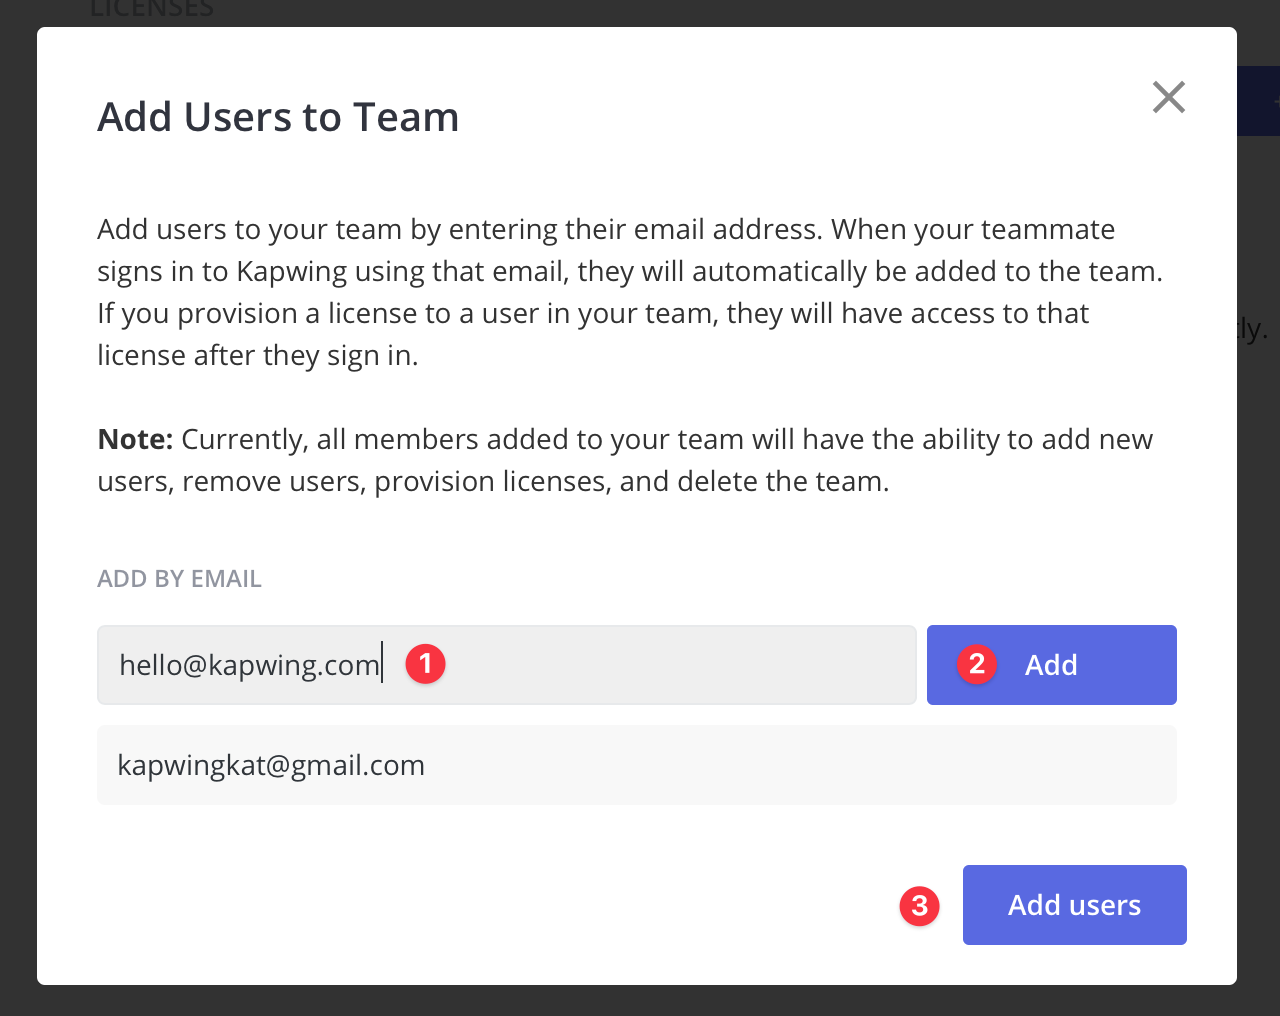 The Add Users modal allows you to input the email address of each team member, then click "Add users" to add team members in batches.